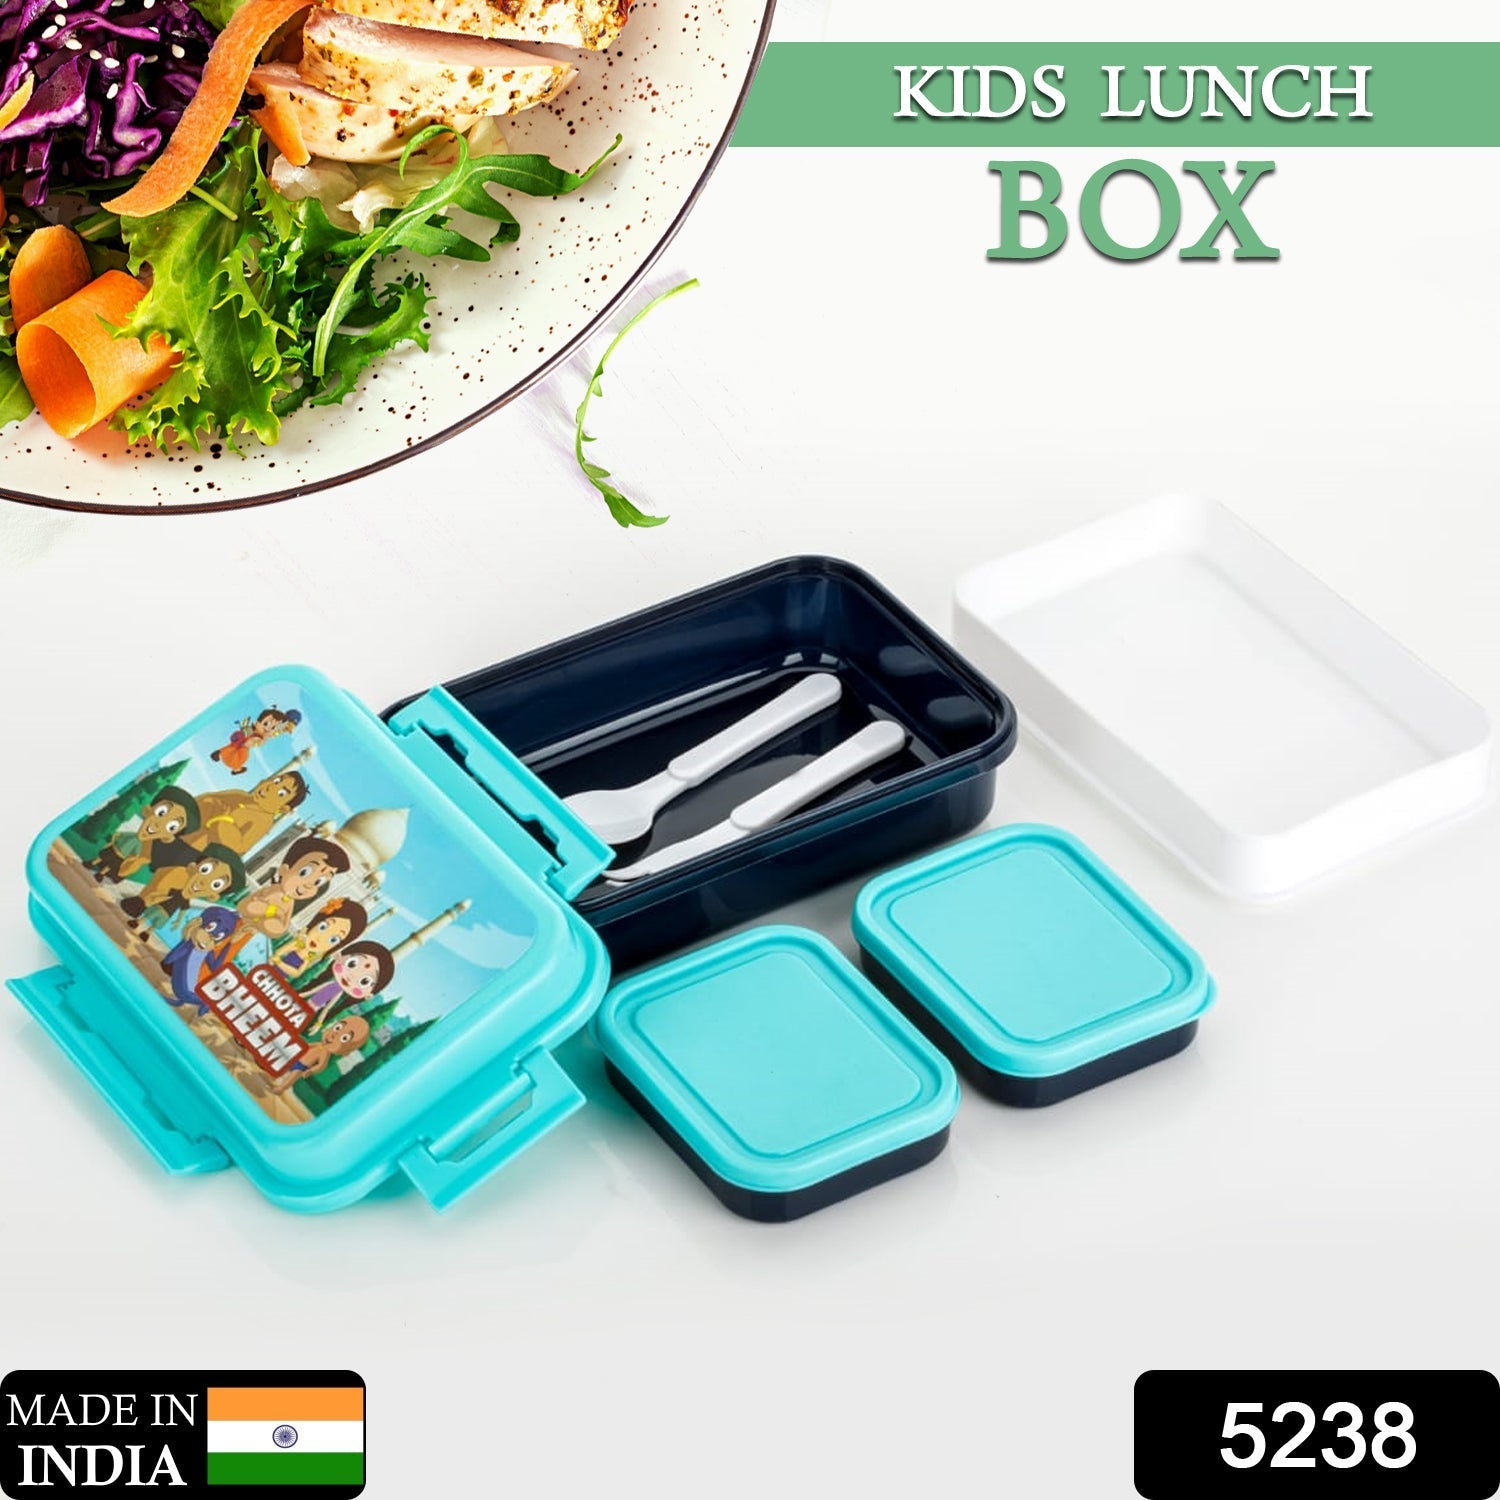 5238 Kids Lunch Box & Air Tight-BPA Free-Inter Lock with 4 Compartment Insulated Lunch Box Plastic Tiffin Box for Boys, Girls & School 